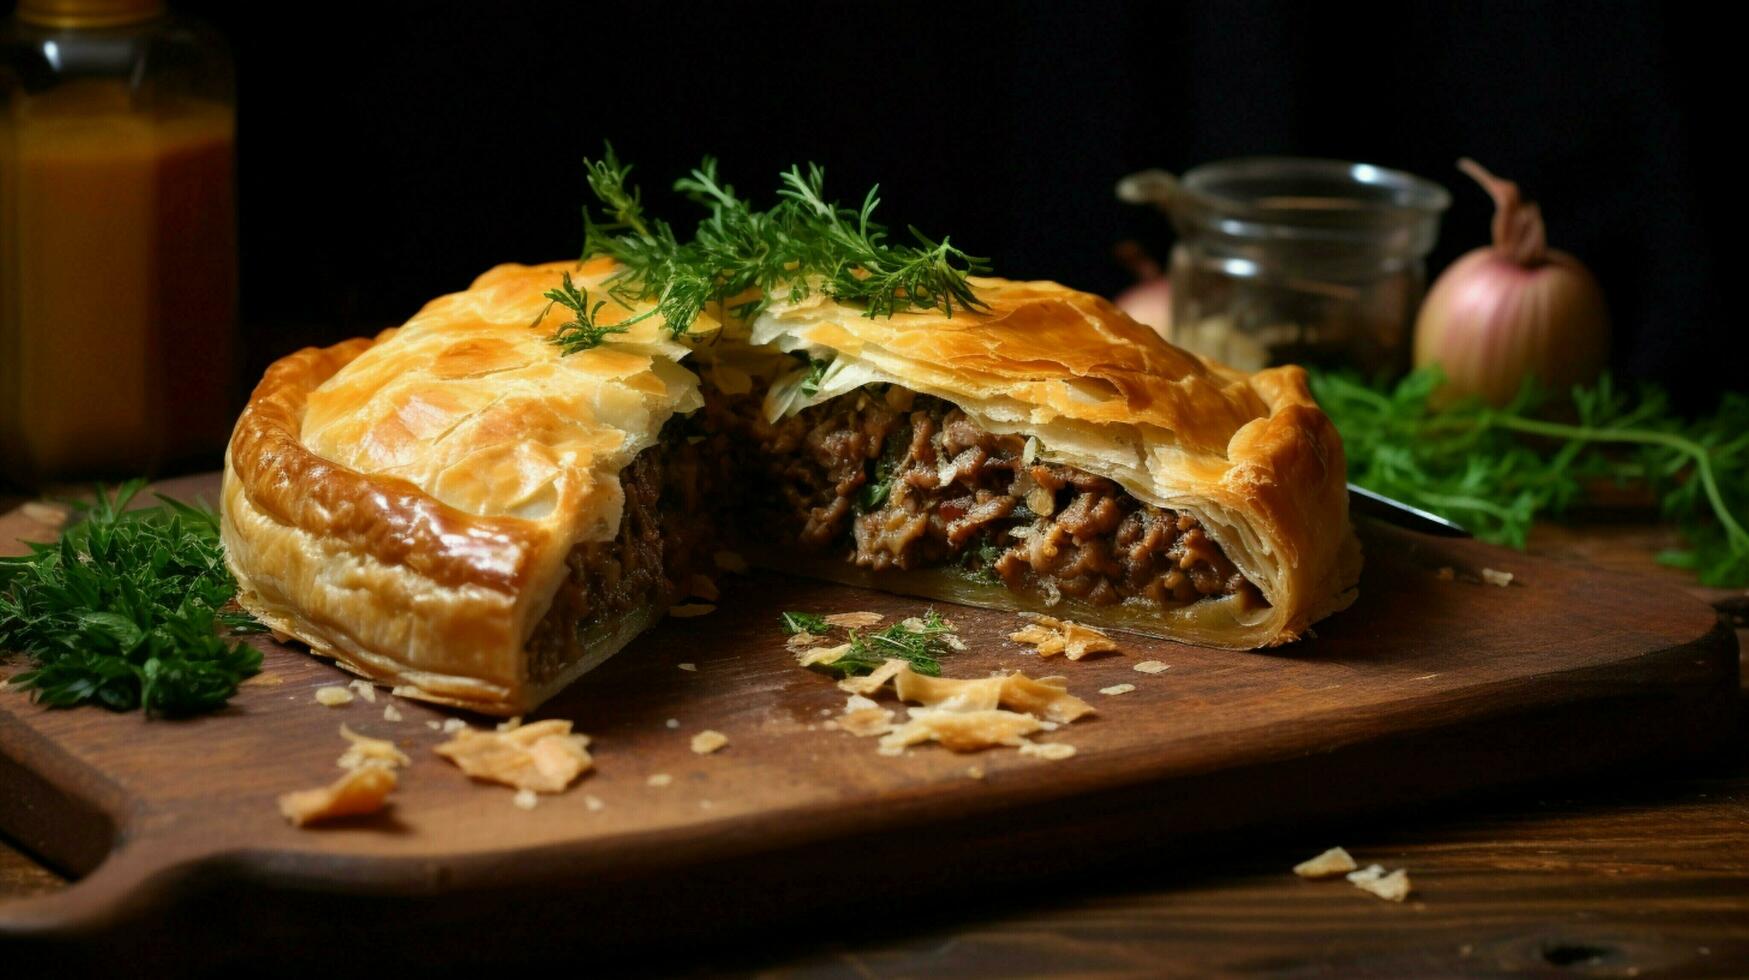 rustic meat pie baked with savory onions photo